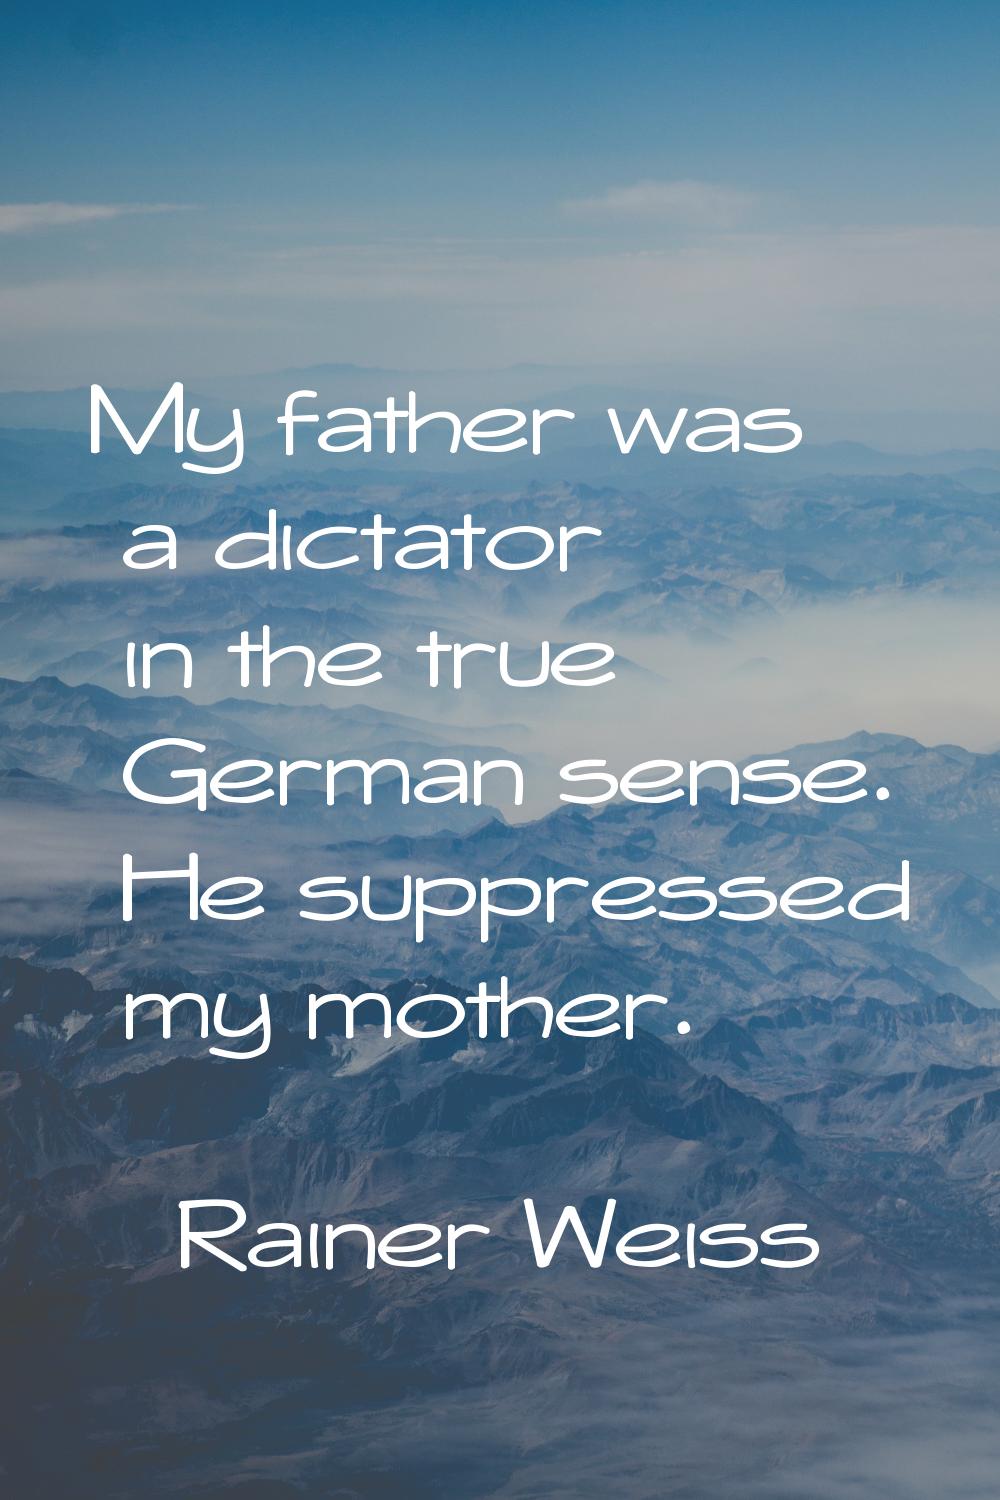 My father was a dictator in the true German sense. He suppressed my mother.